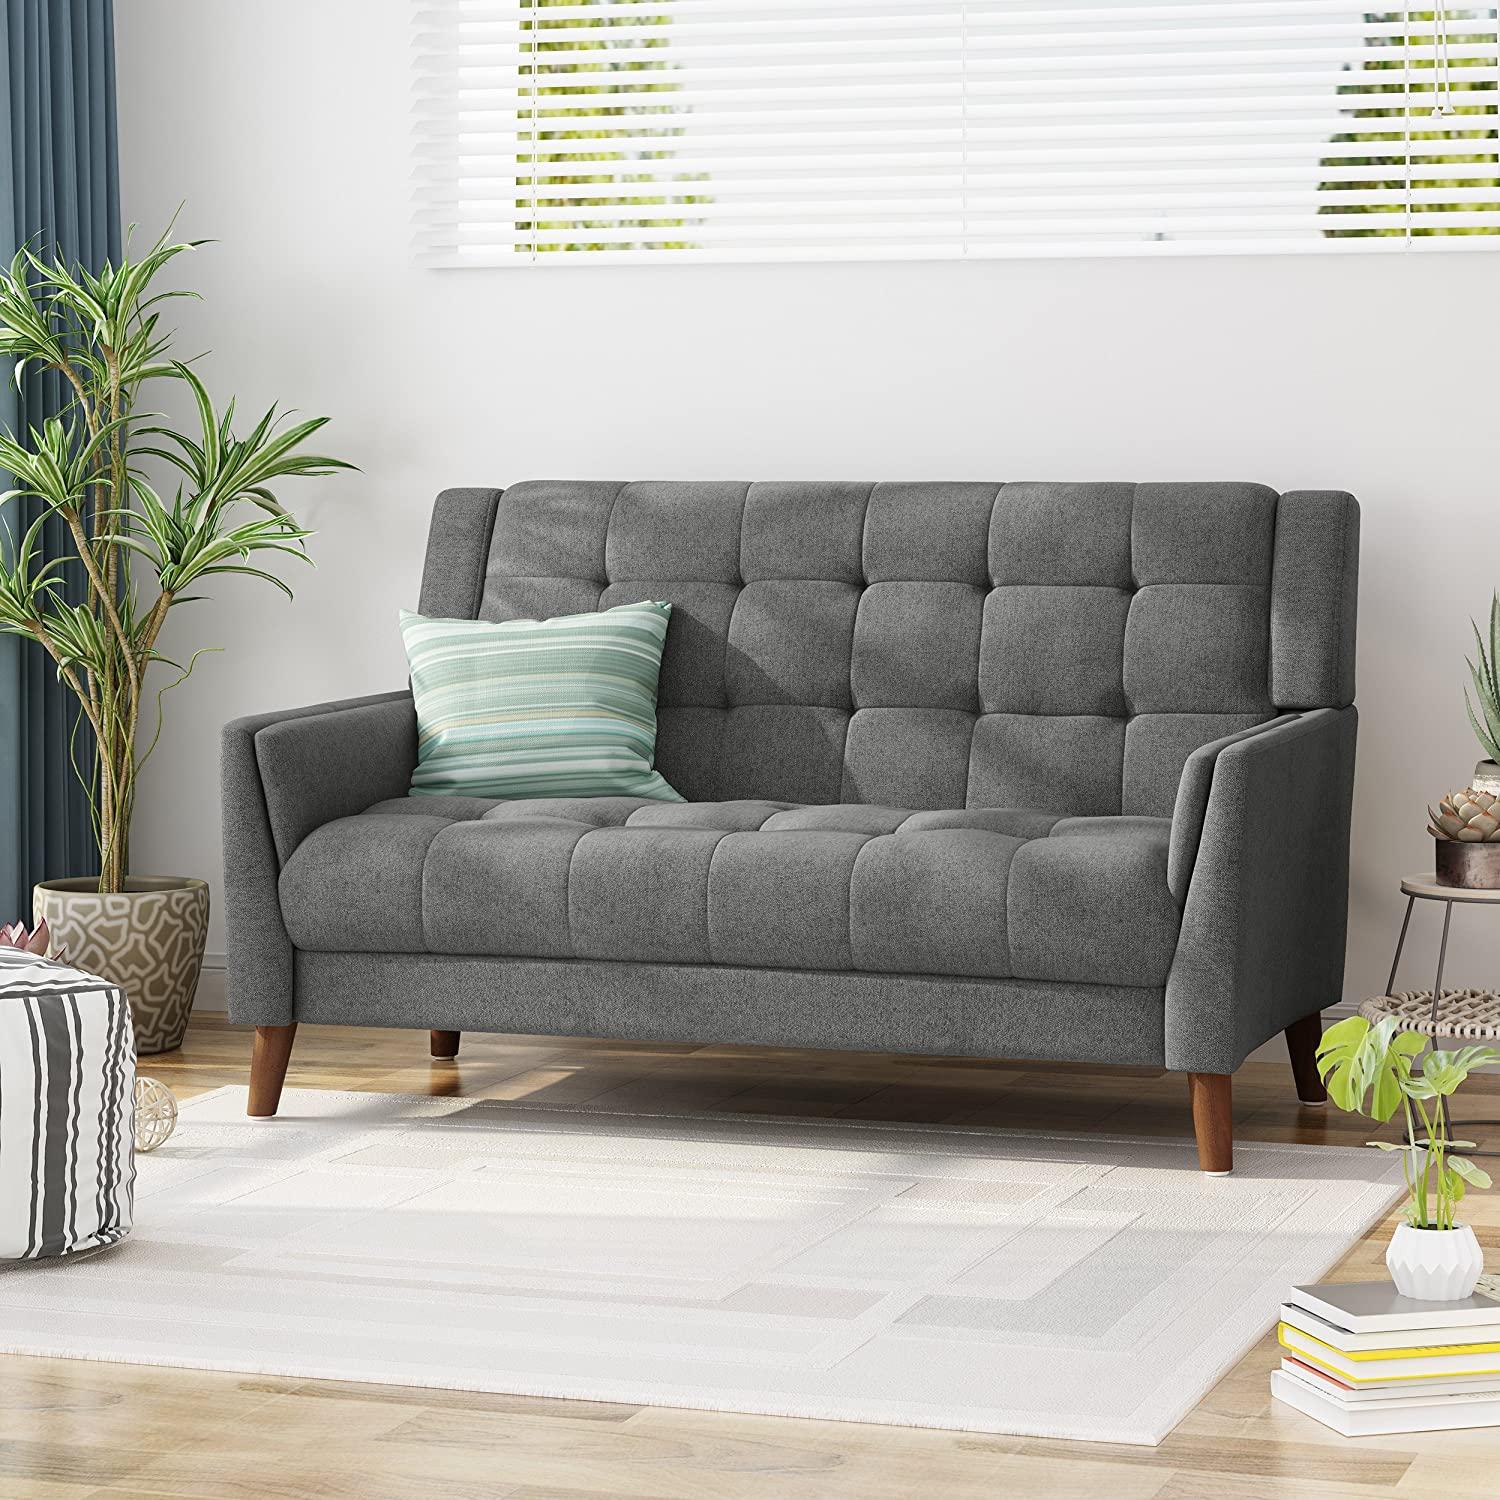 Christopher Knight Home Evelyn Fabric Loveseat for $249 Shipped